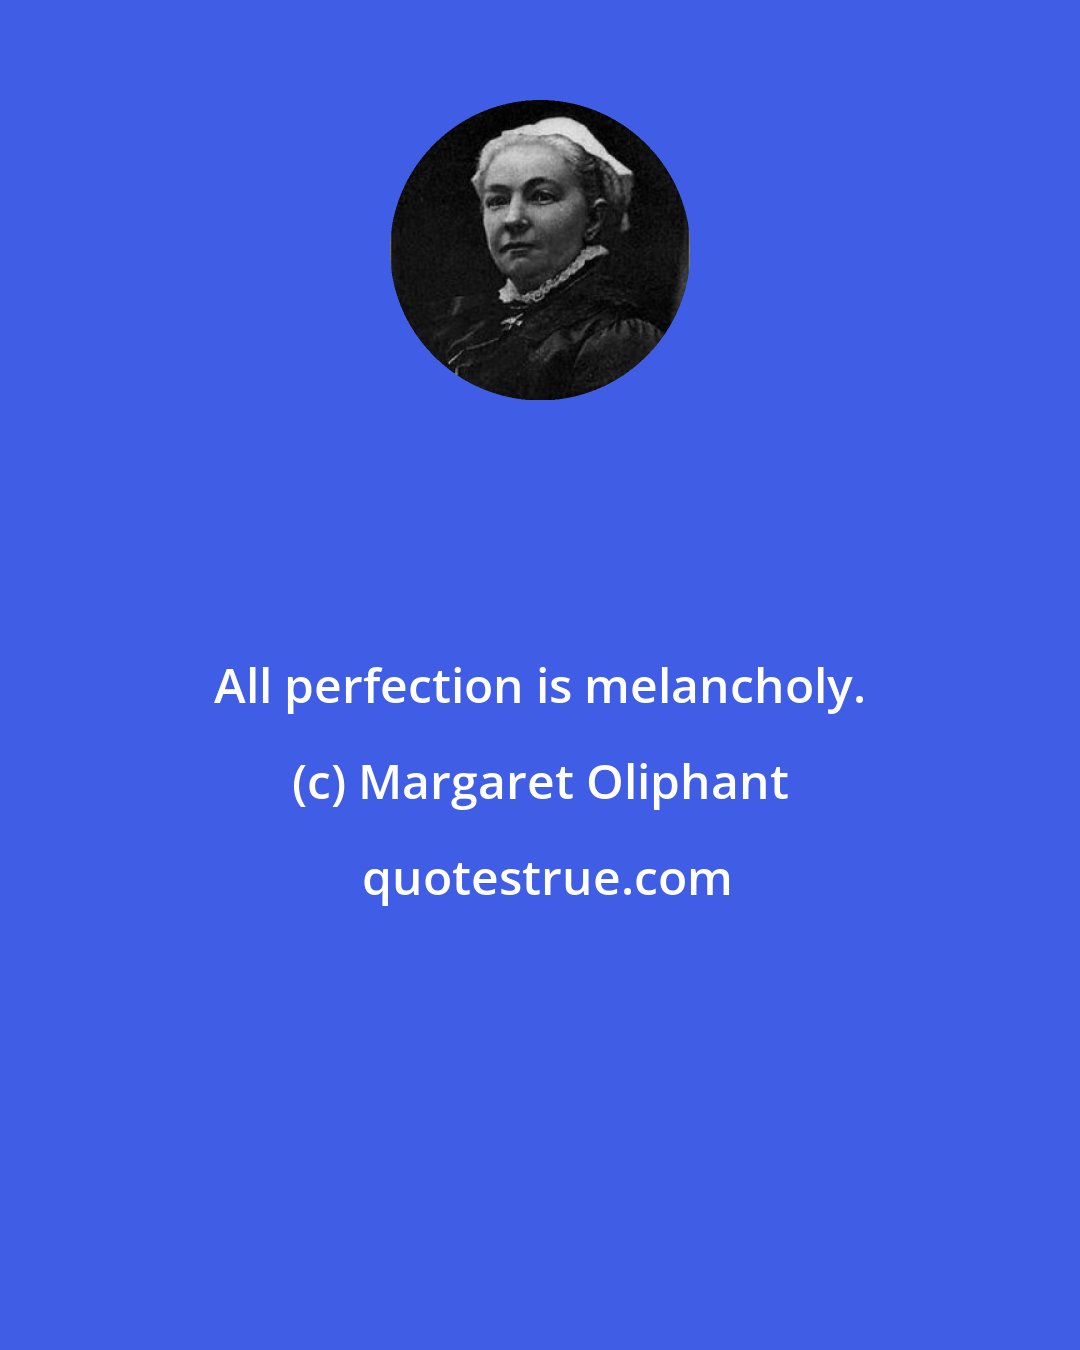 Margaret Oliphant: All perfection is melancholy.